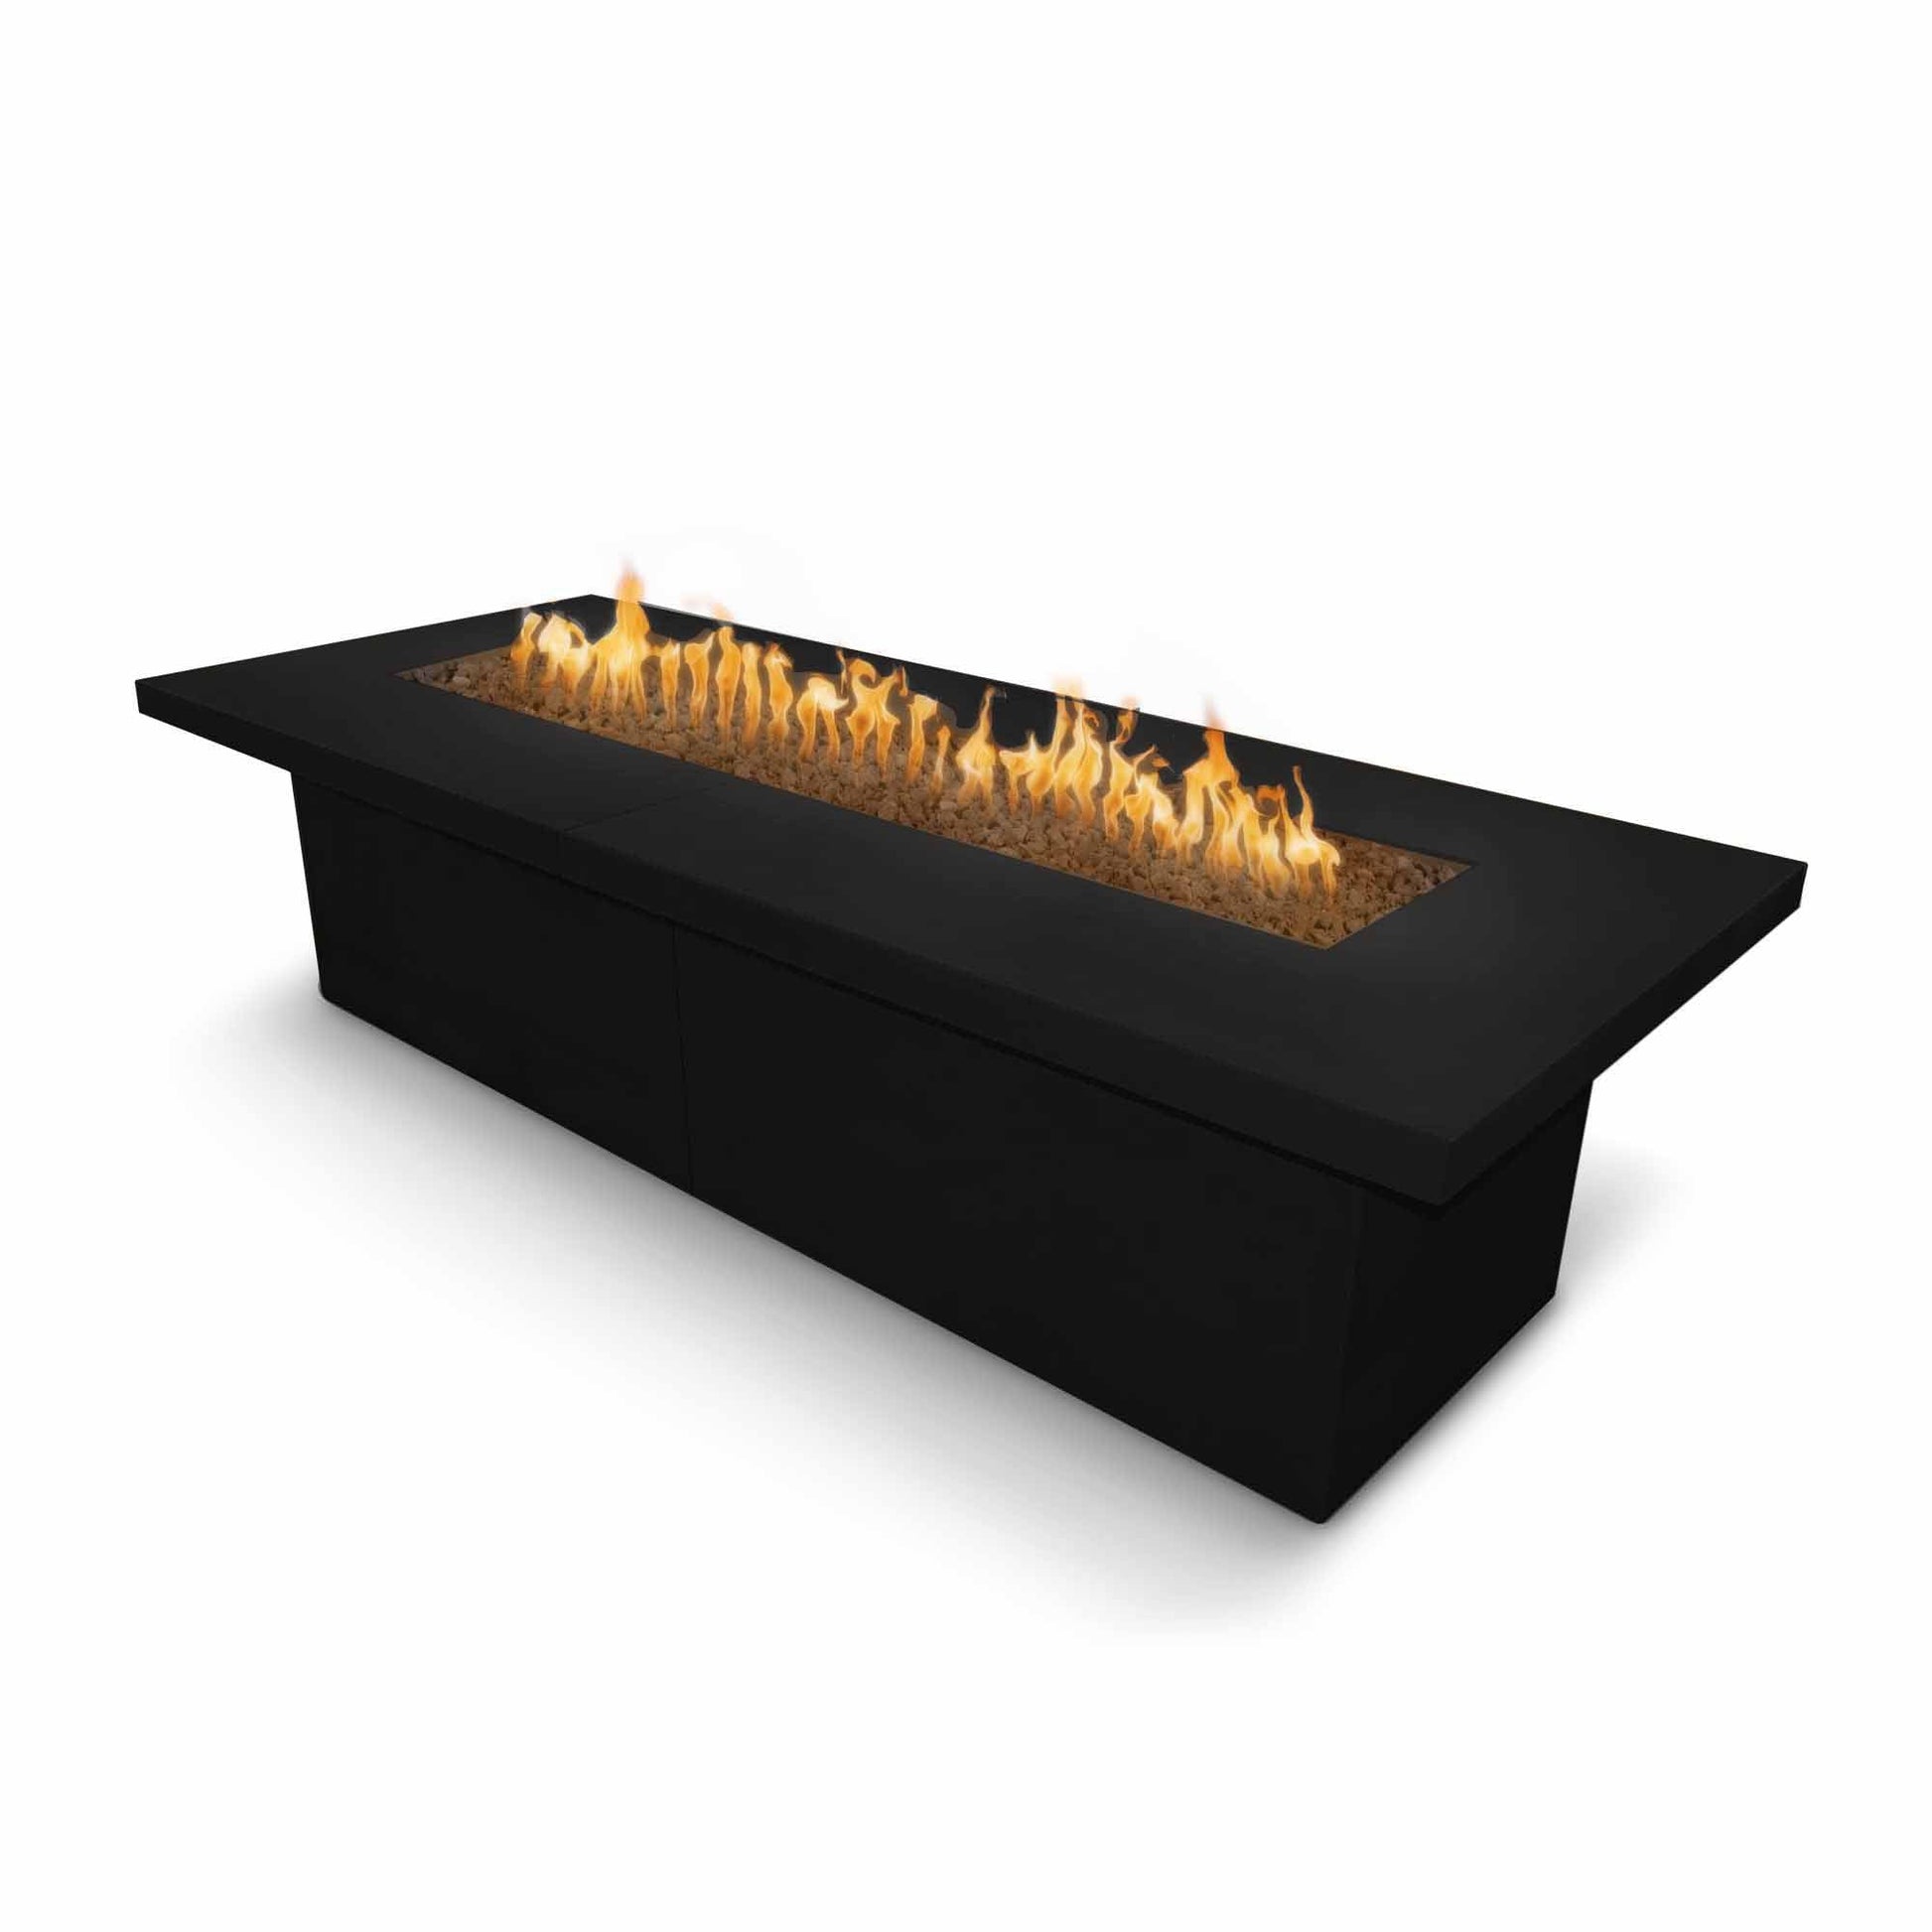 The Outdoor Plus Rectangular Newport 120" White Powder Coated Metal Liquid Propane Fire Pit with Match Lit Ignition